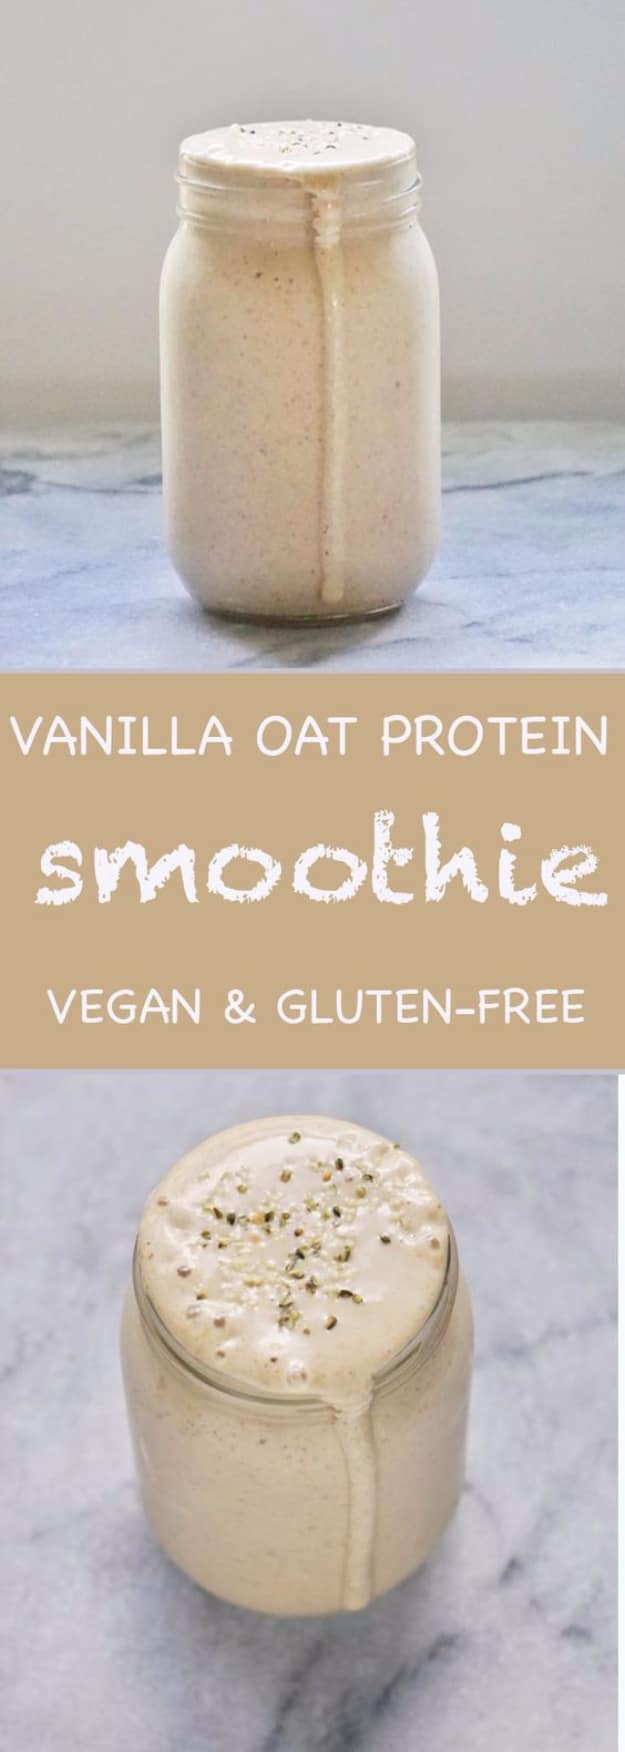 Healthy Smoothie Recipes - Vanilla Oat Protein Smoothie - Easy ideas perfect for breakfast, energy. Low calorie and high protein recipes for weightloss and to lose weight. Simple homemade recipe ideas that kids love. Quick EASY morning recipes before work and school, after workout #smoothies #healthy #smoothie #healthyrecipes #recipes